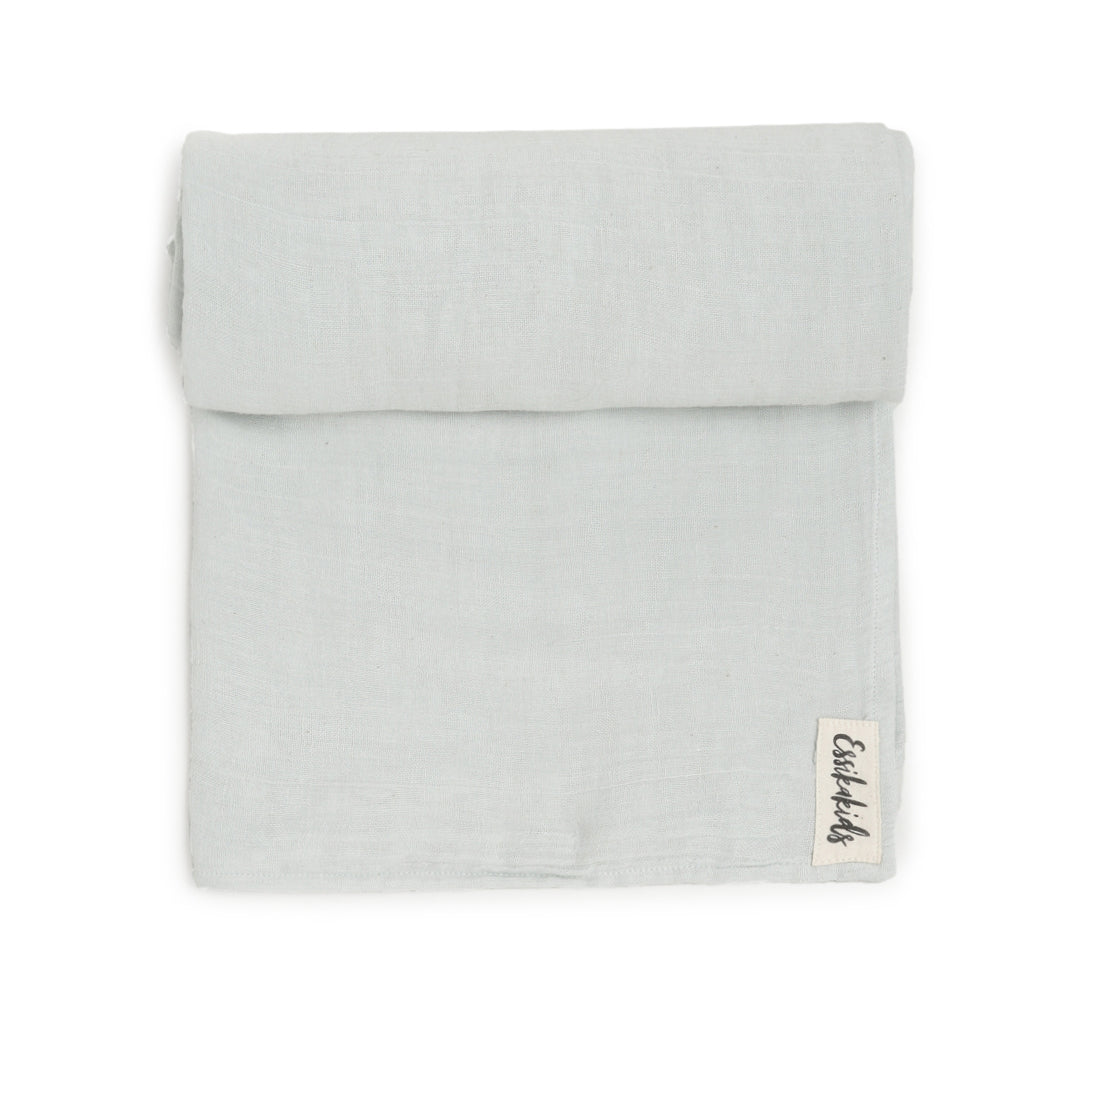 Baby Swaddle Wrap| Organic Cotton | 0 to 6 months